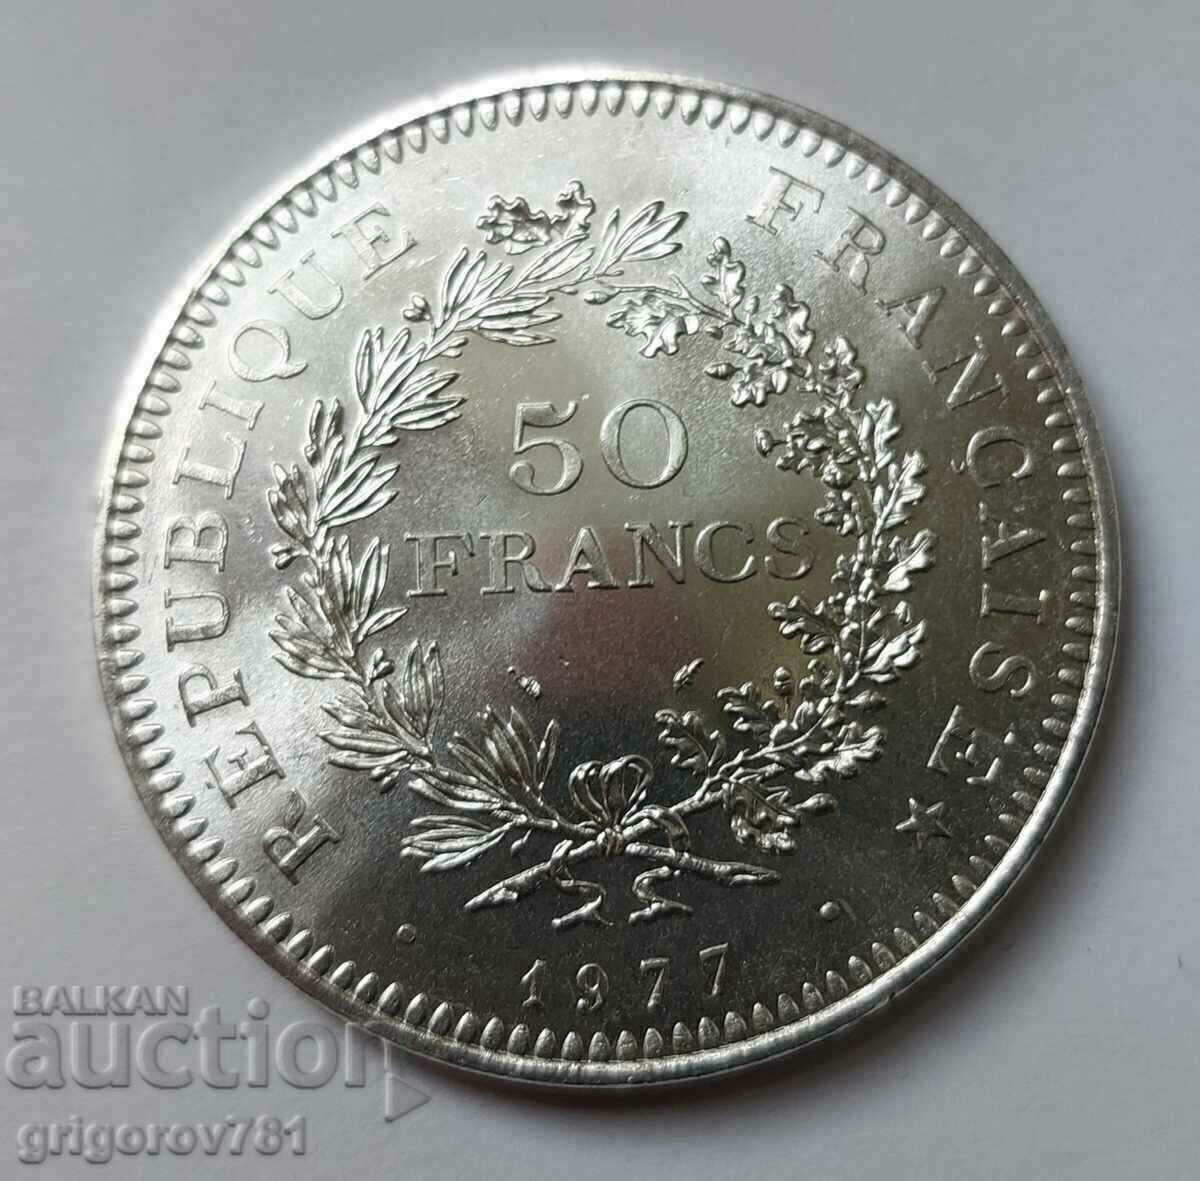 50 Francs Silver France 1977 - Silver Coin #5